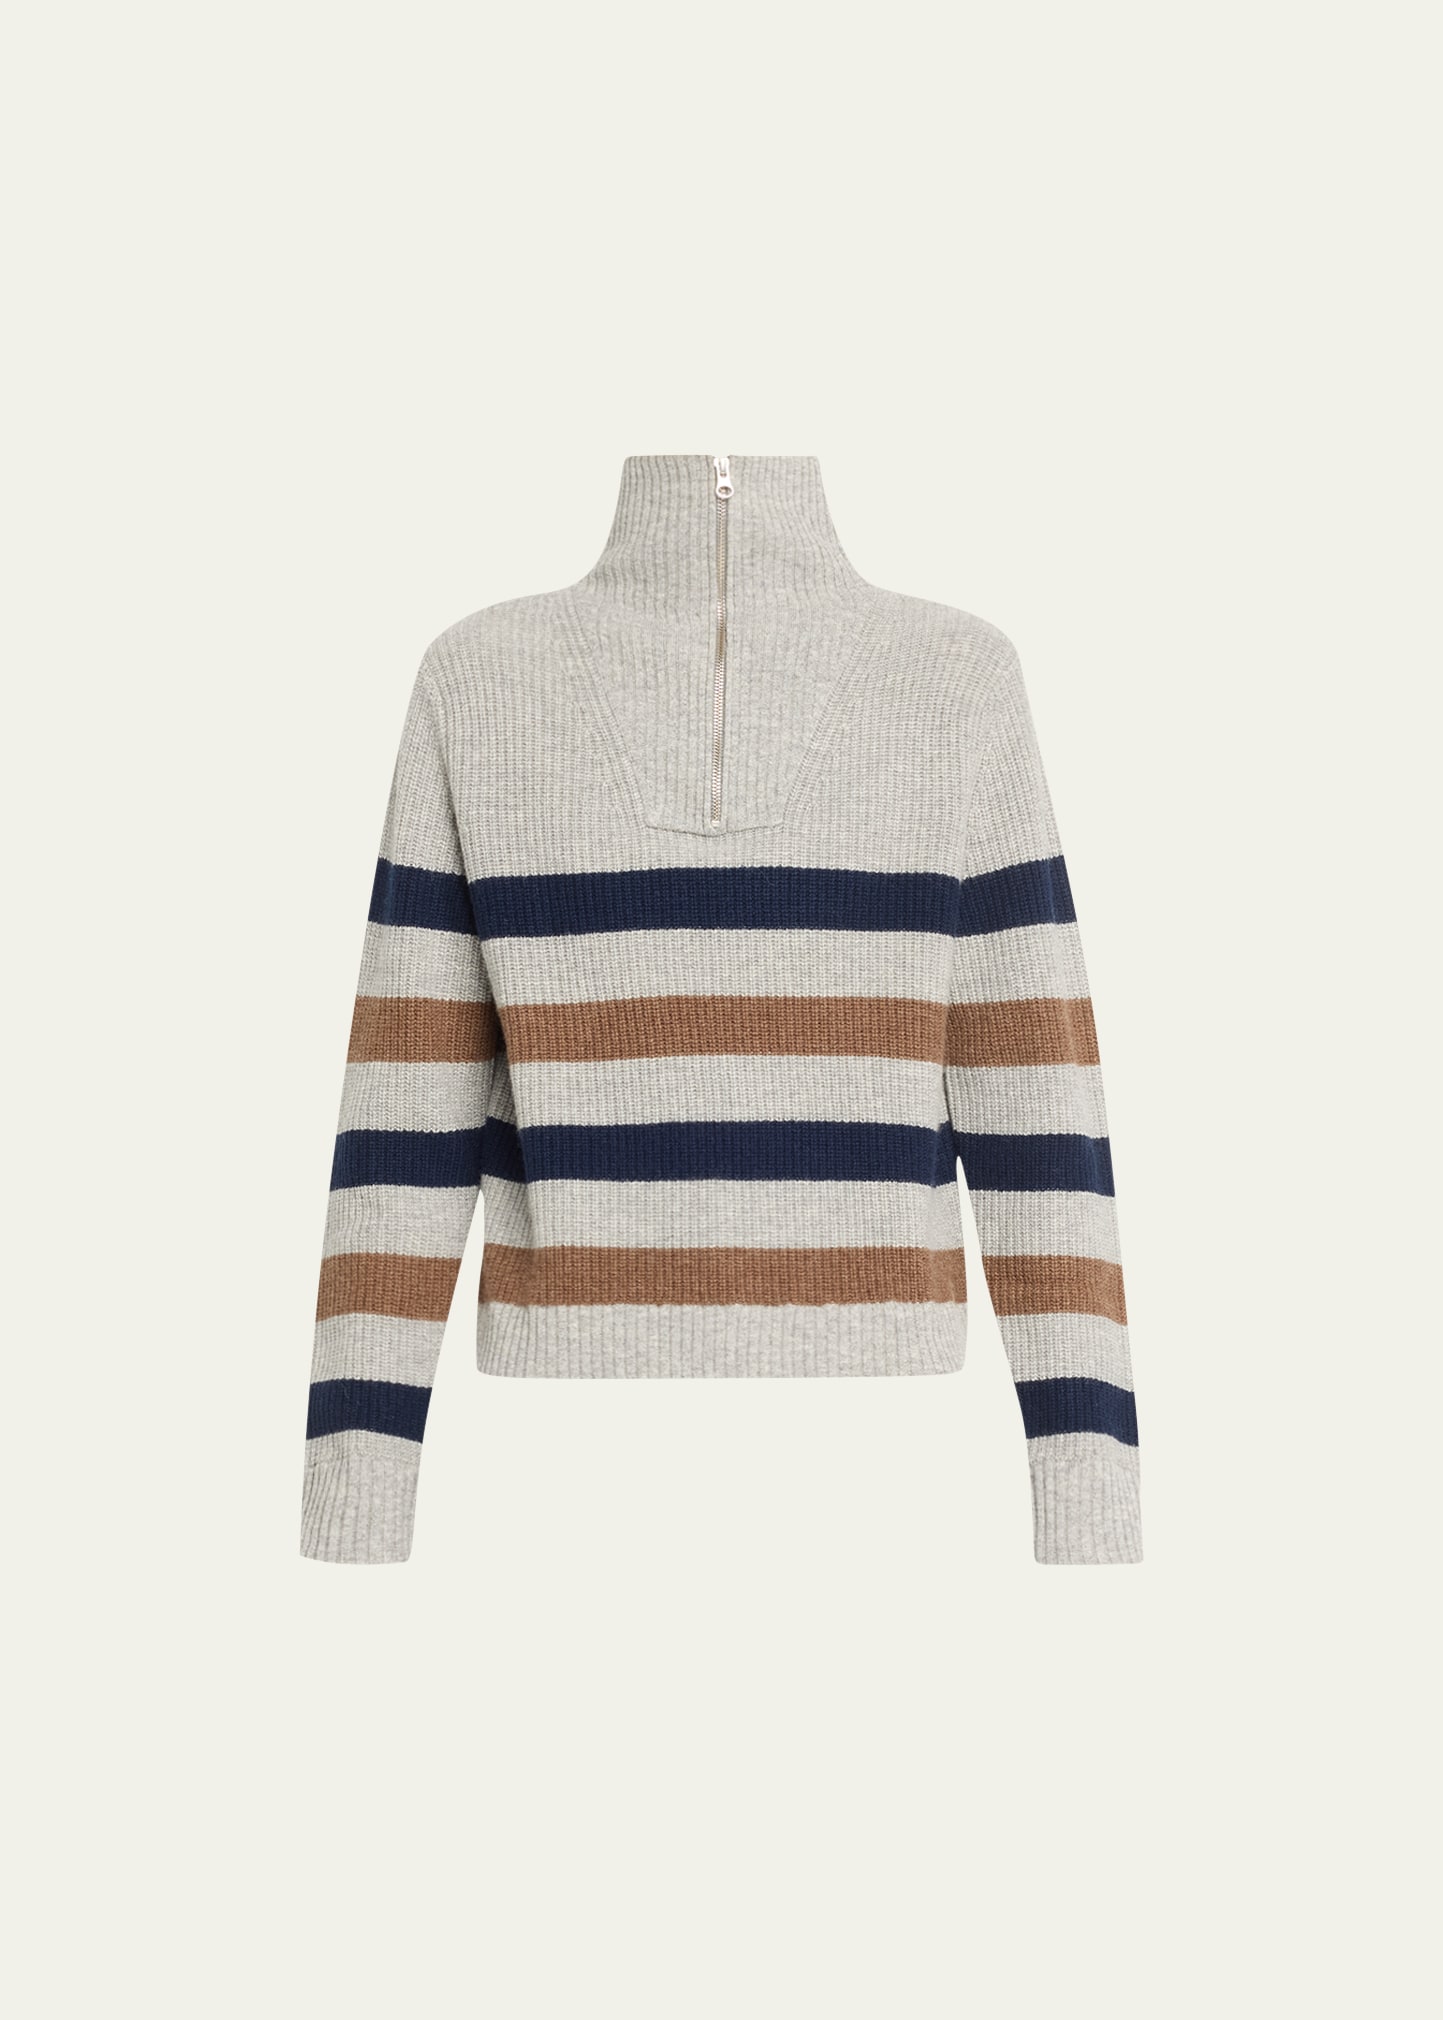 The Morgan Wool and Cashmere Quarter-Zip Sweater